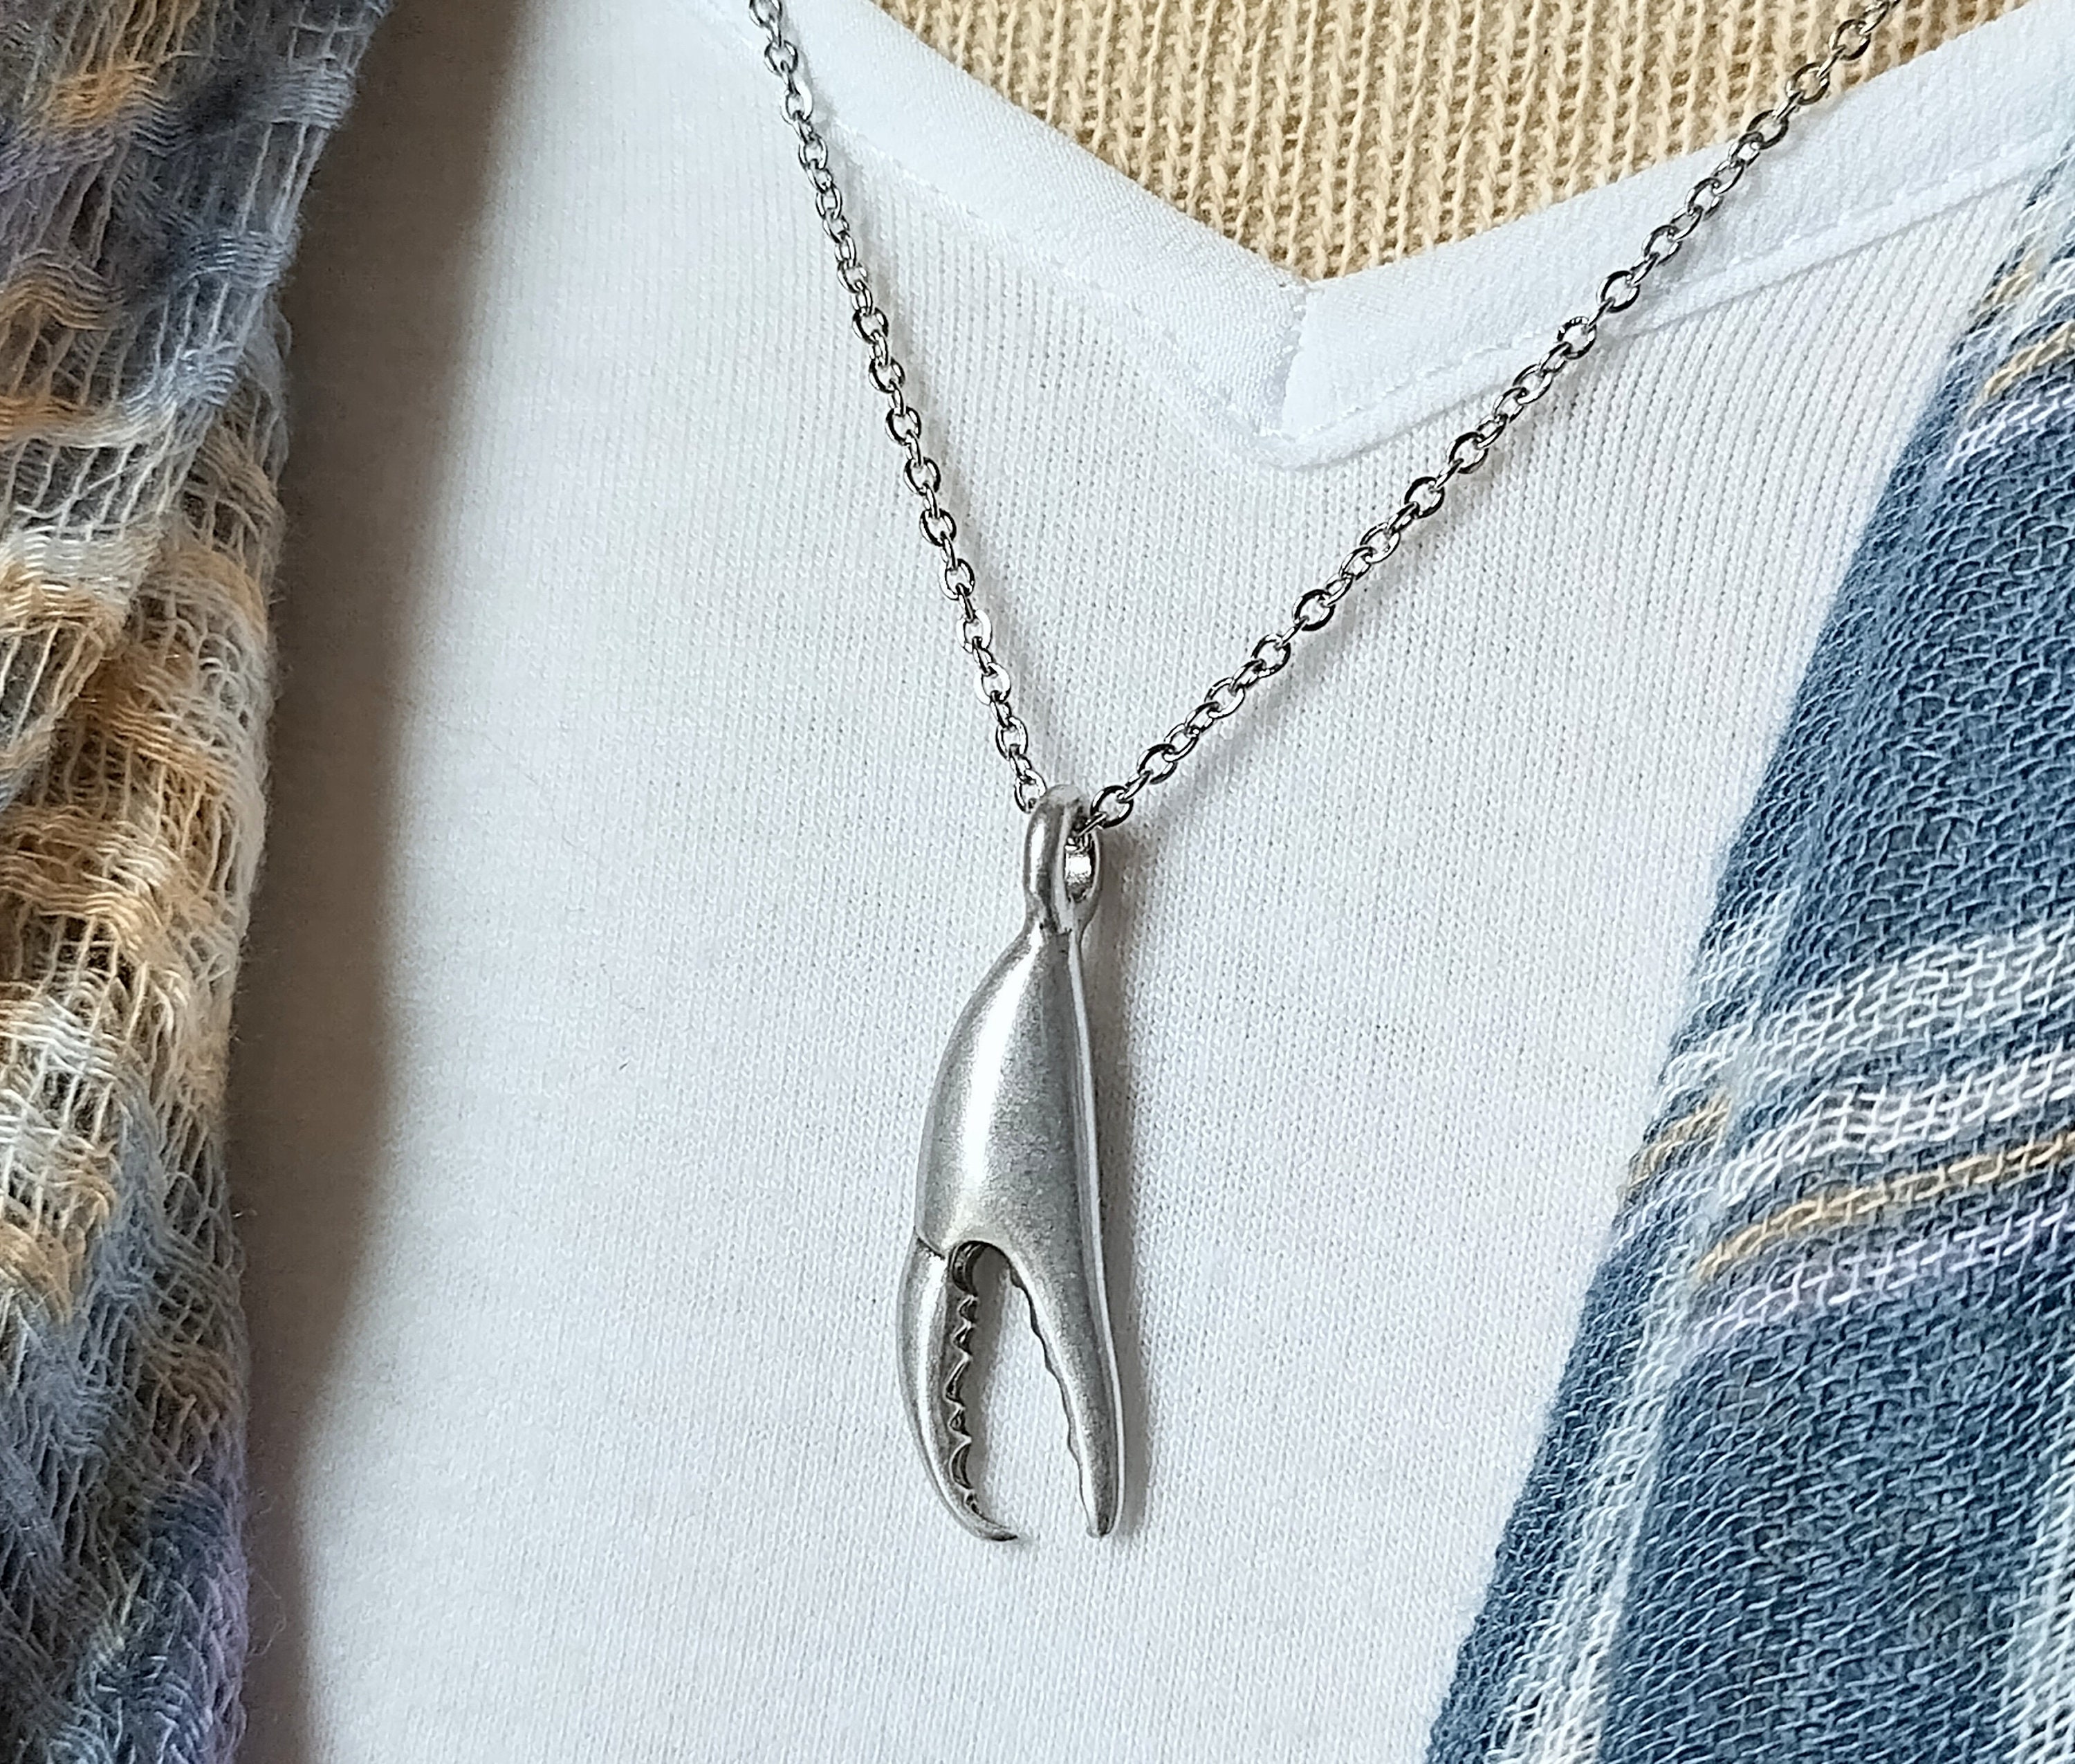 Crab Claw Necklace– Turner Contemporary